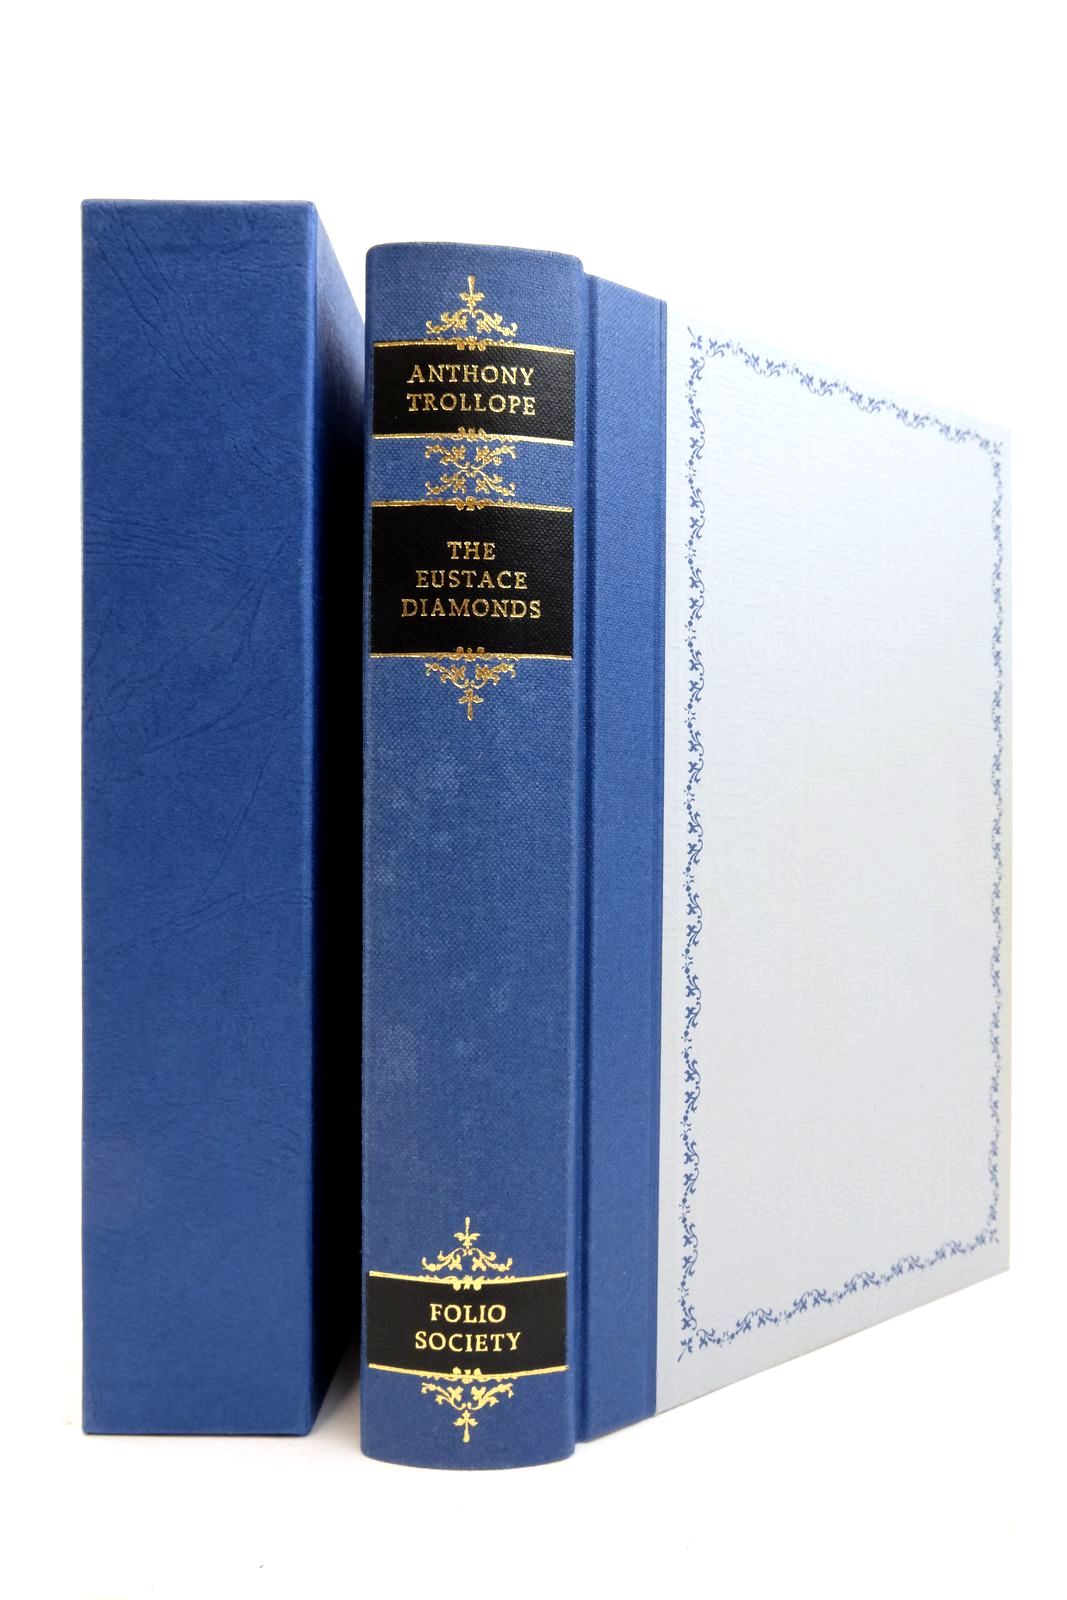 Photo of THE EUSTACE DIAMONDS written by Trollope, Anthony illustrated by Thomas, Llewellyn published by Folio Society (STOCK CODE: 2137326)  for sale by Stella & Rose's Books